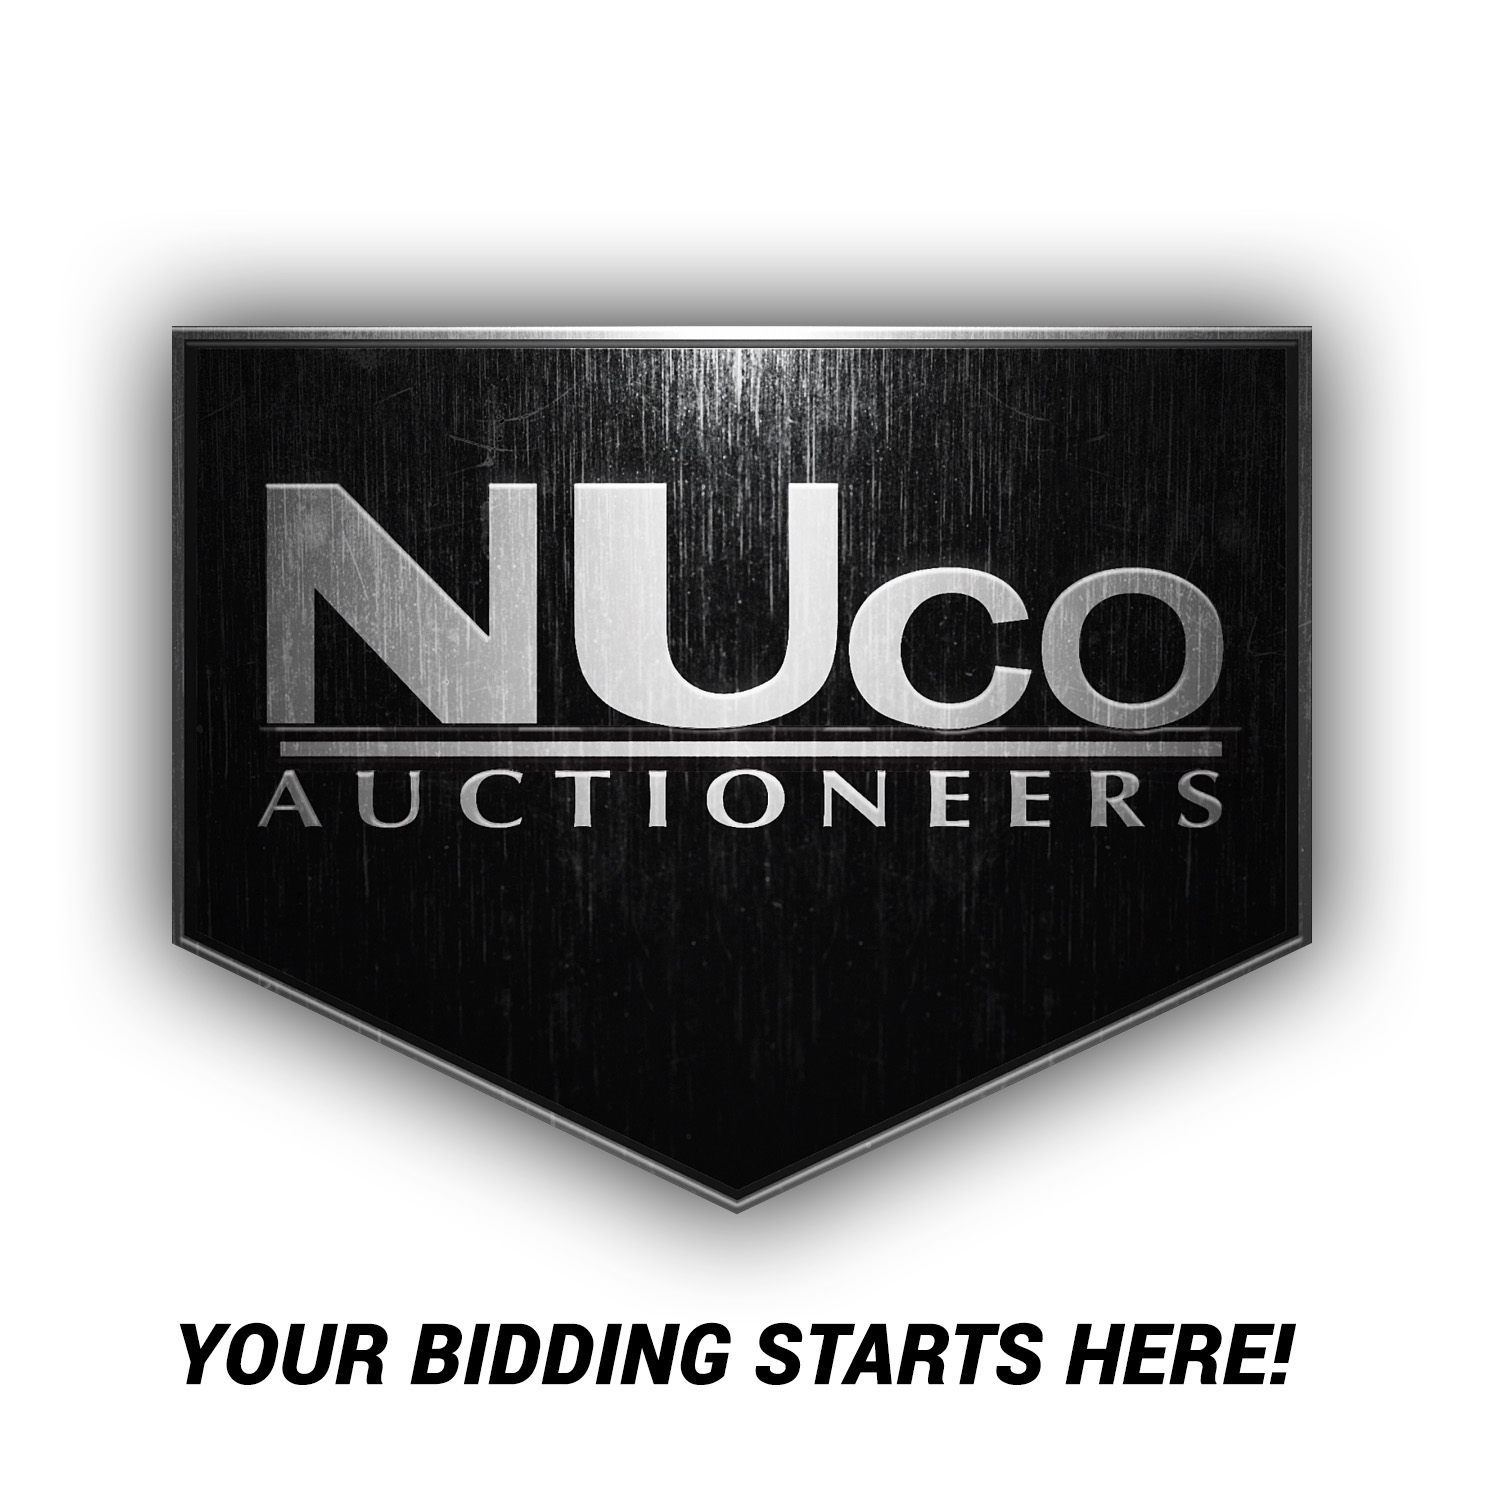 Find Nuco Auctioneers's adverts listed on Junk Mail